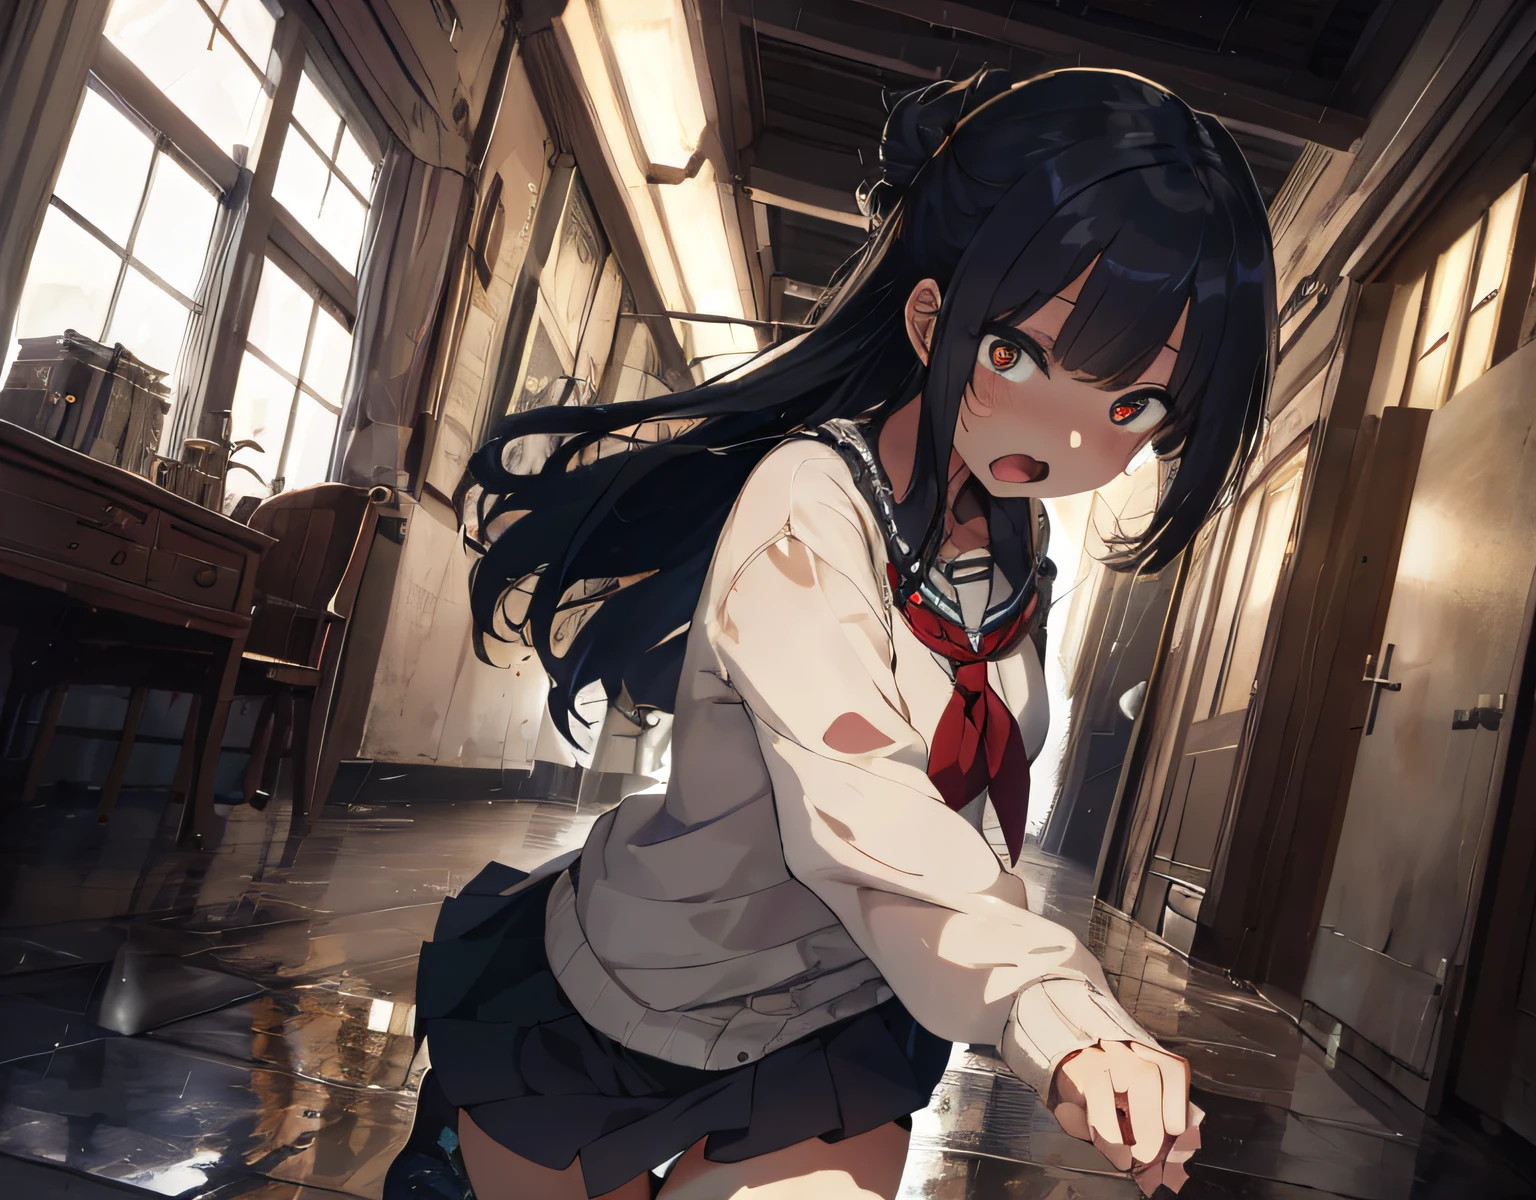 masterpiece, best quality, ultra-detailed, illustration, an extremely delicate and beautiful, cute, 2girls, yuri ,2girls holding hands and running, energetic, active, cute, black hair, labyrinth, Mysterious world, night, rain outside the window, lanthanum, search, adventure, run away, chased, dark blue colored skirt, intricate building, complex architecture, dynamic angle, cinematic angle, indoor , wide shot, run, huge building, dark and light, troubled eyebrows, scared, anguish, white blouse, decadent, drifting, where are we? , looking around, fisheye lens, vulgarity, open mouth, (panty shot)++, line, cute panties, breast grab, heavy breathing, trembling, torn clothes,